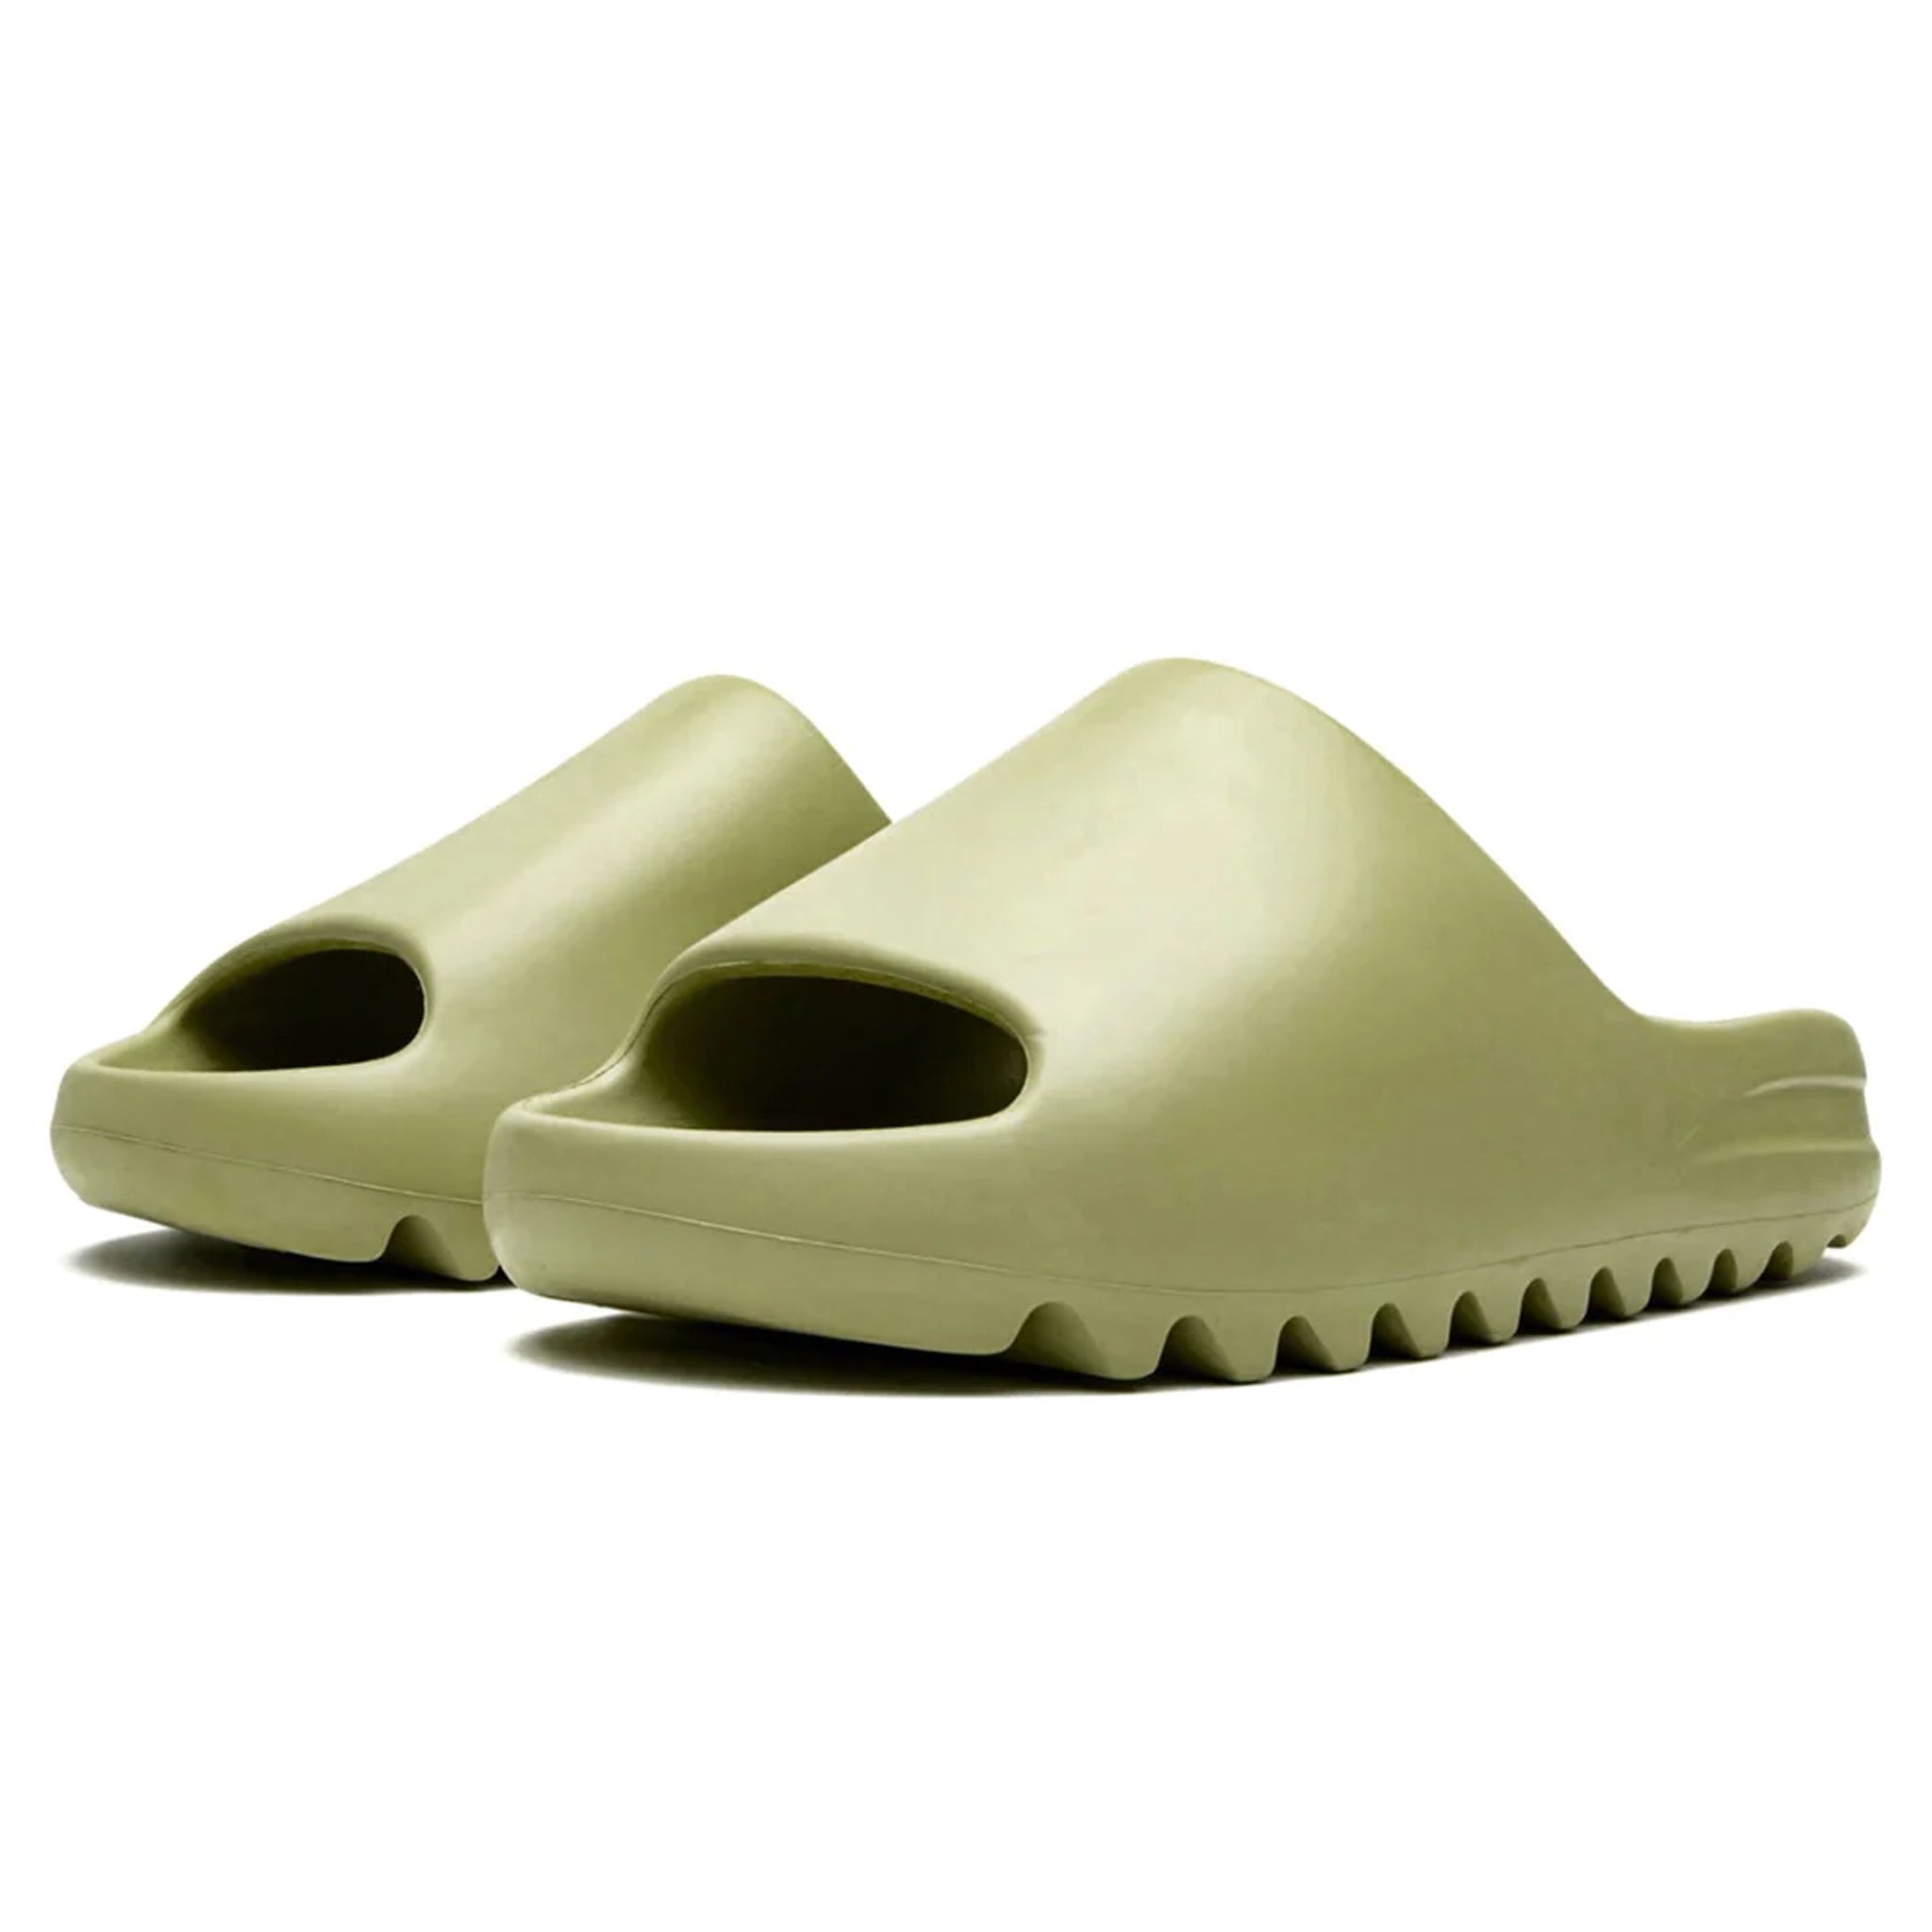 Front side view of Adidas Yeezy Slide Resin GZ5551